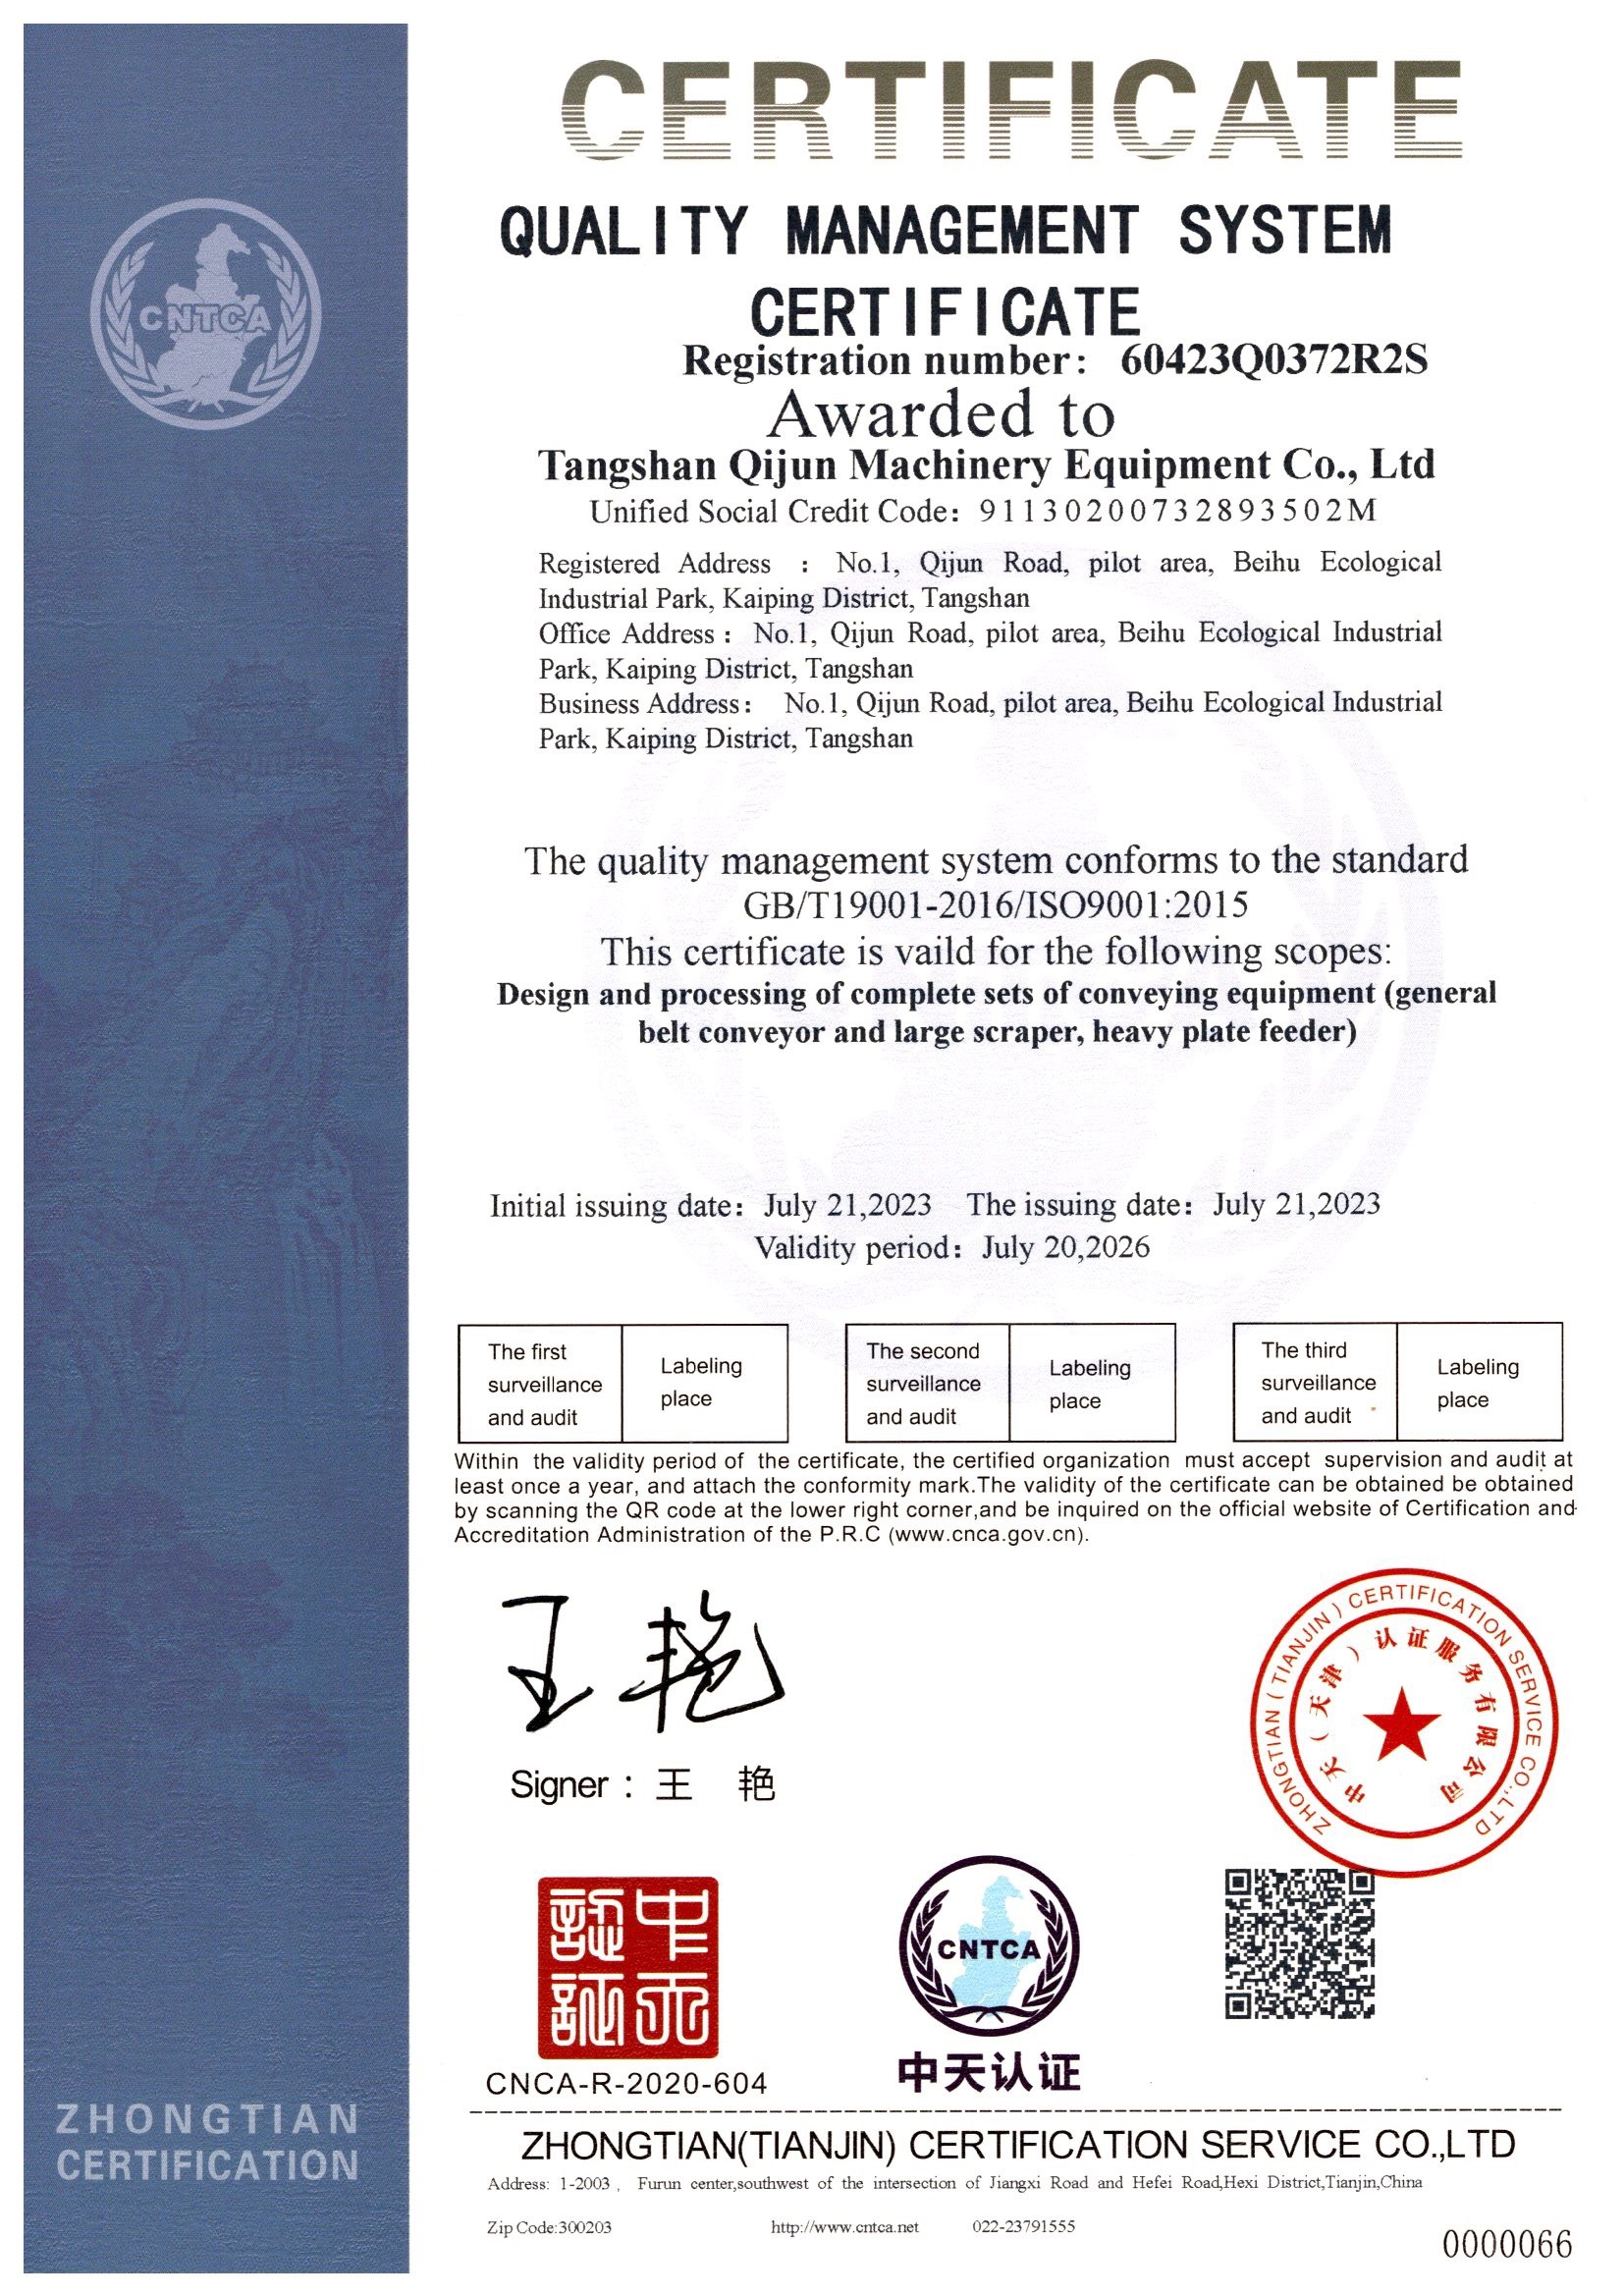 Quality Management System Certification (English)